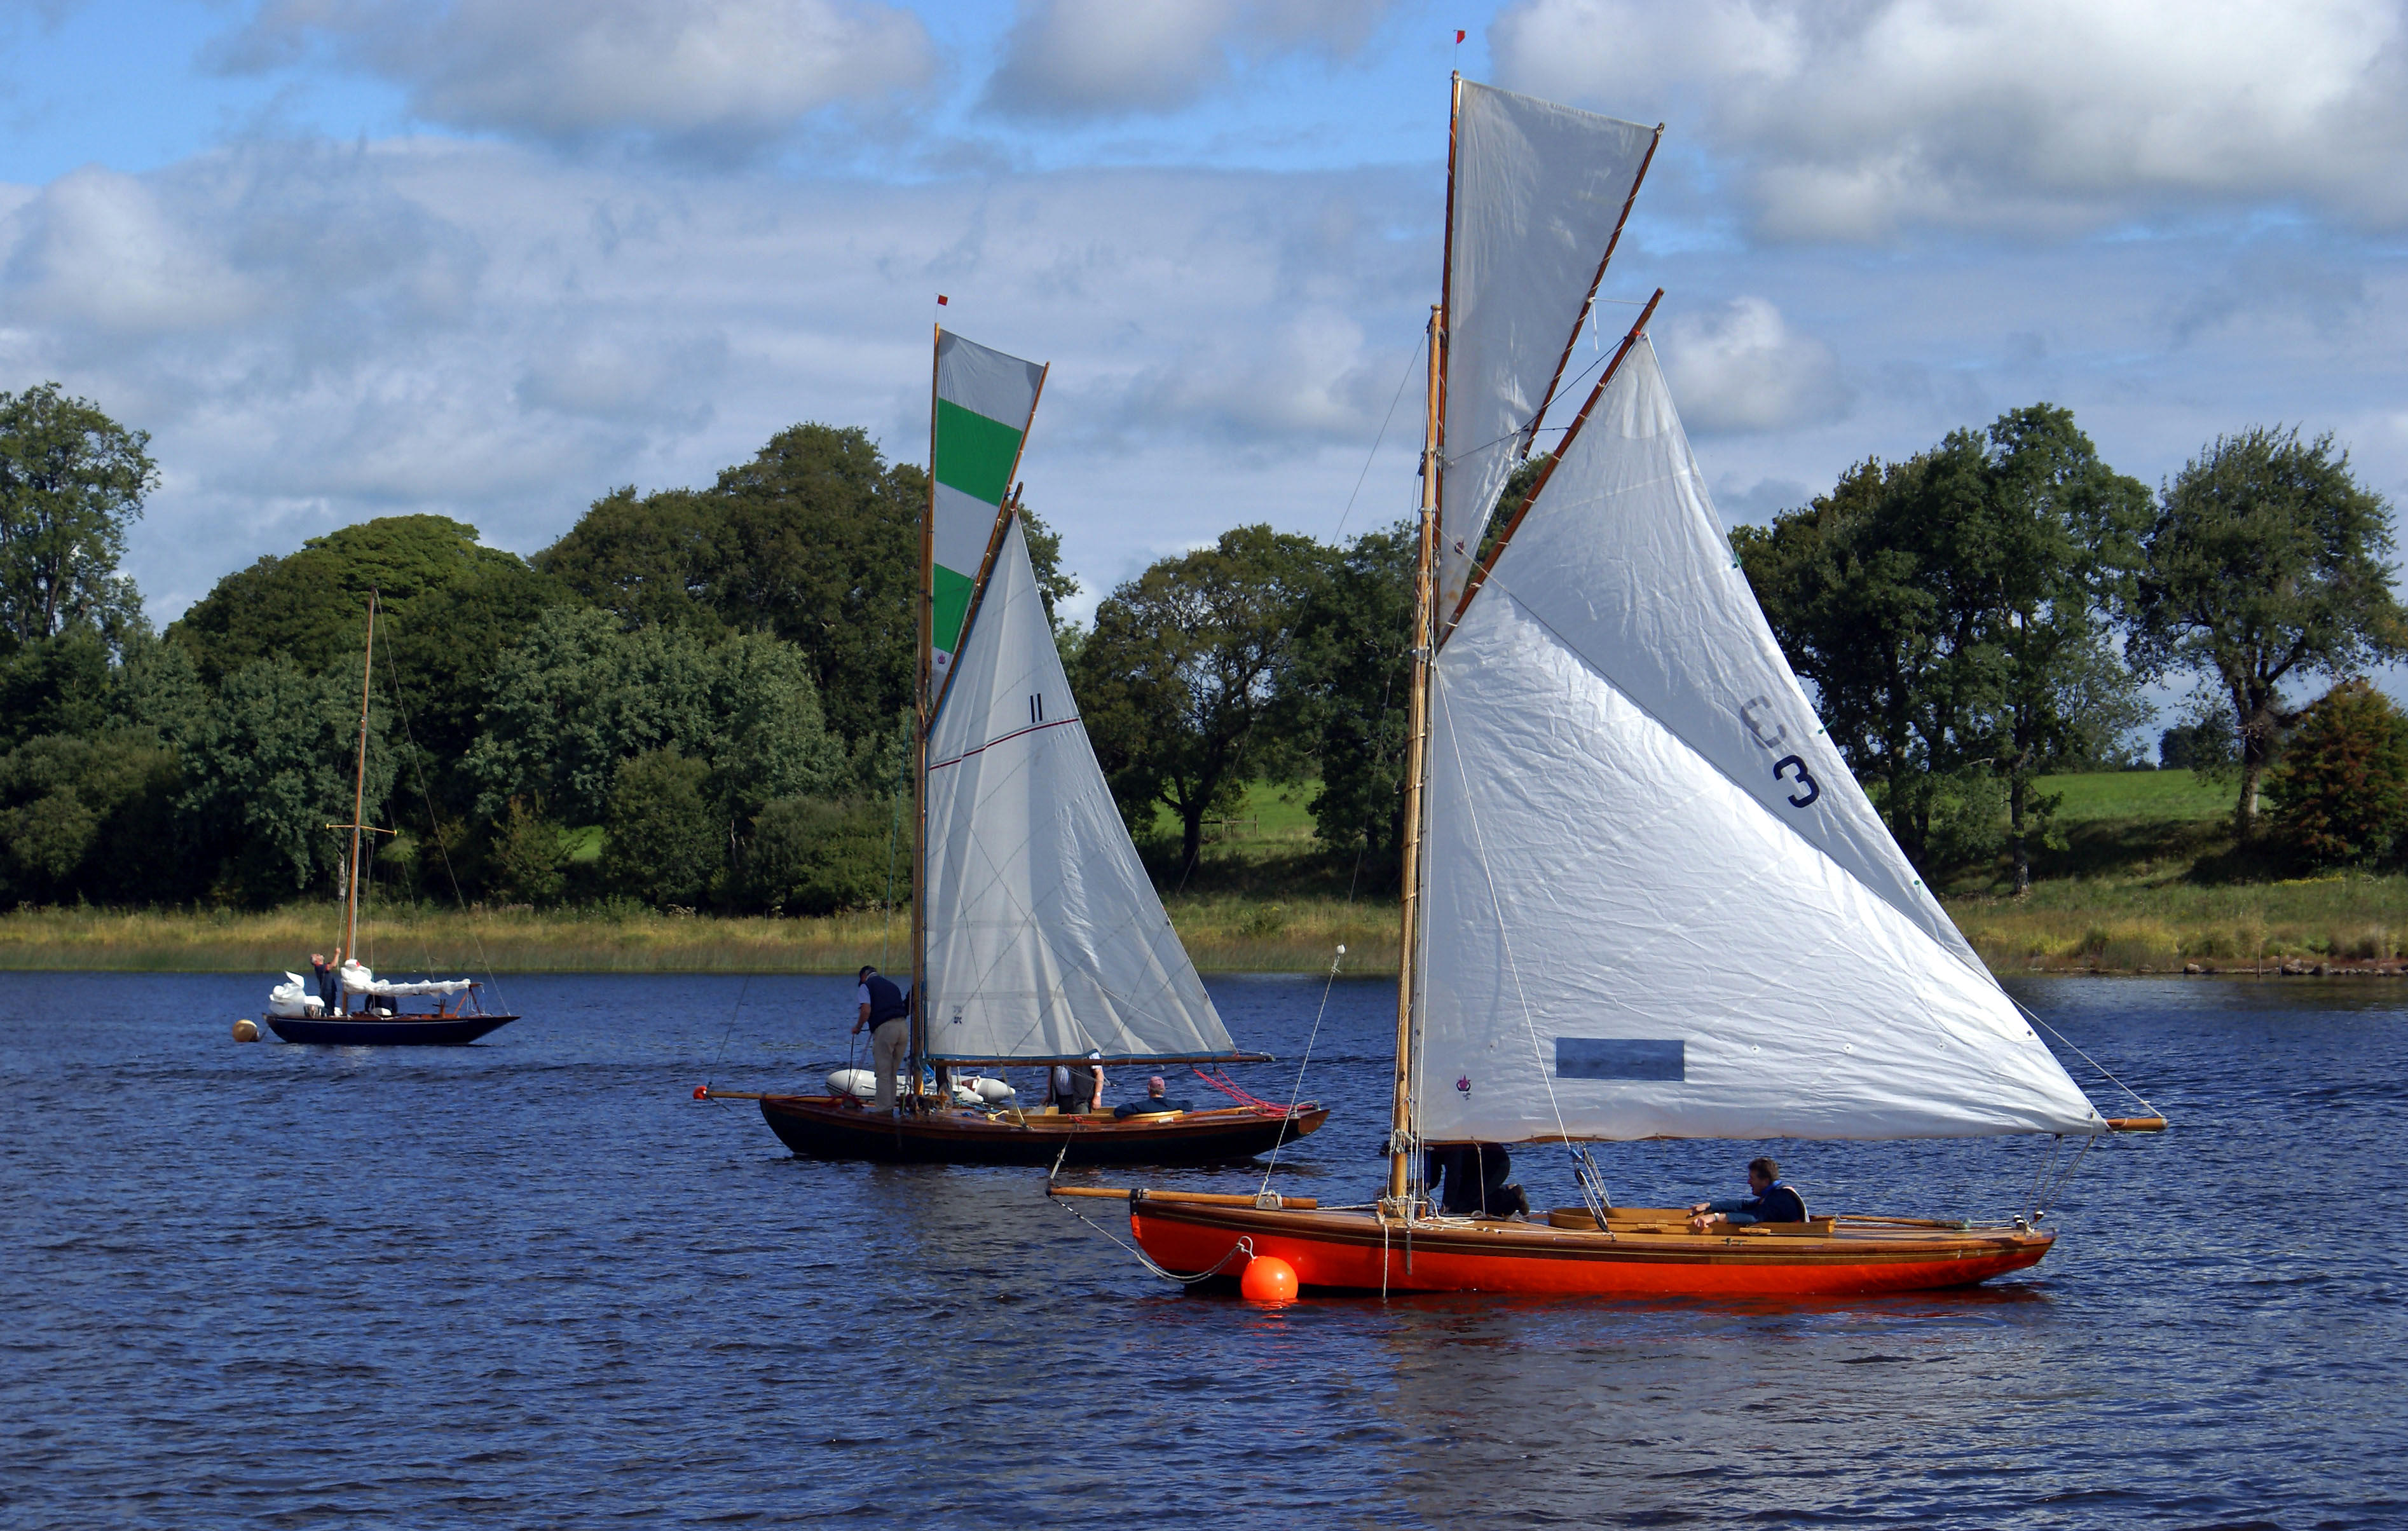 KDNDXB Three classic yachts, including Leila (3) and Deilginis (11) moored with crews preparing to race in regatta on Lough Erne, Co. Fermanagh in 2010